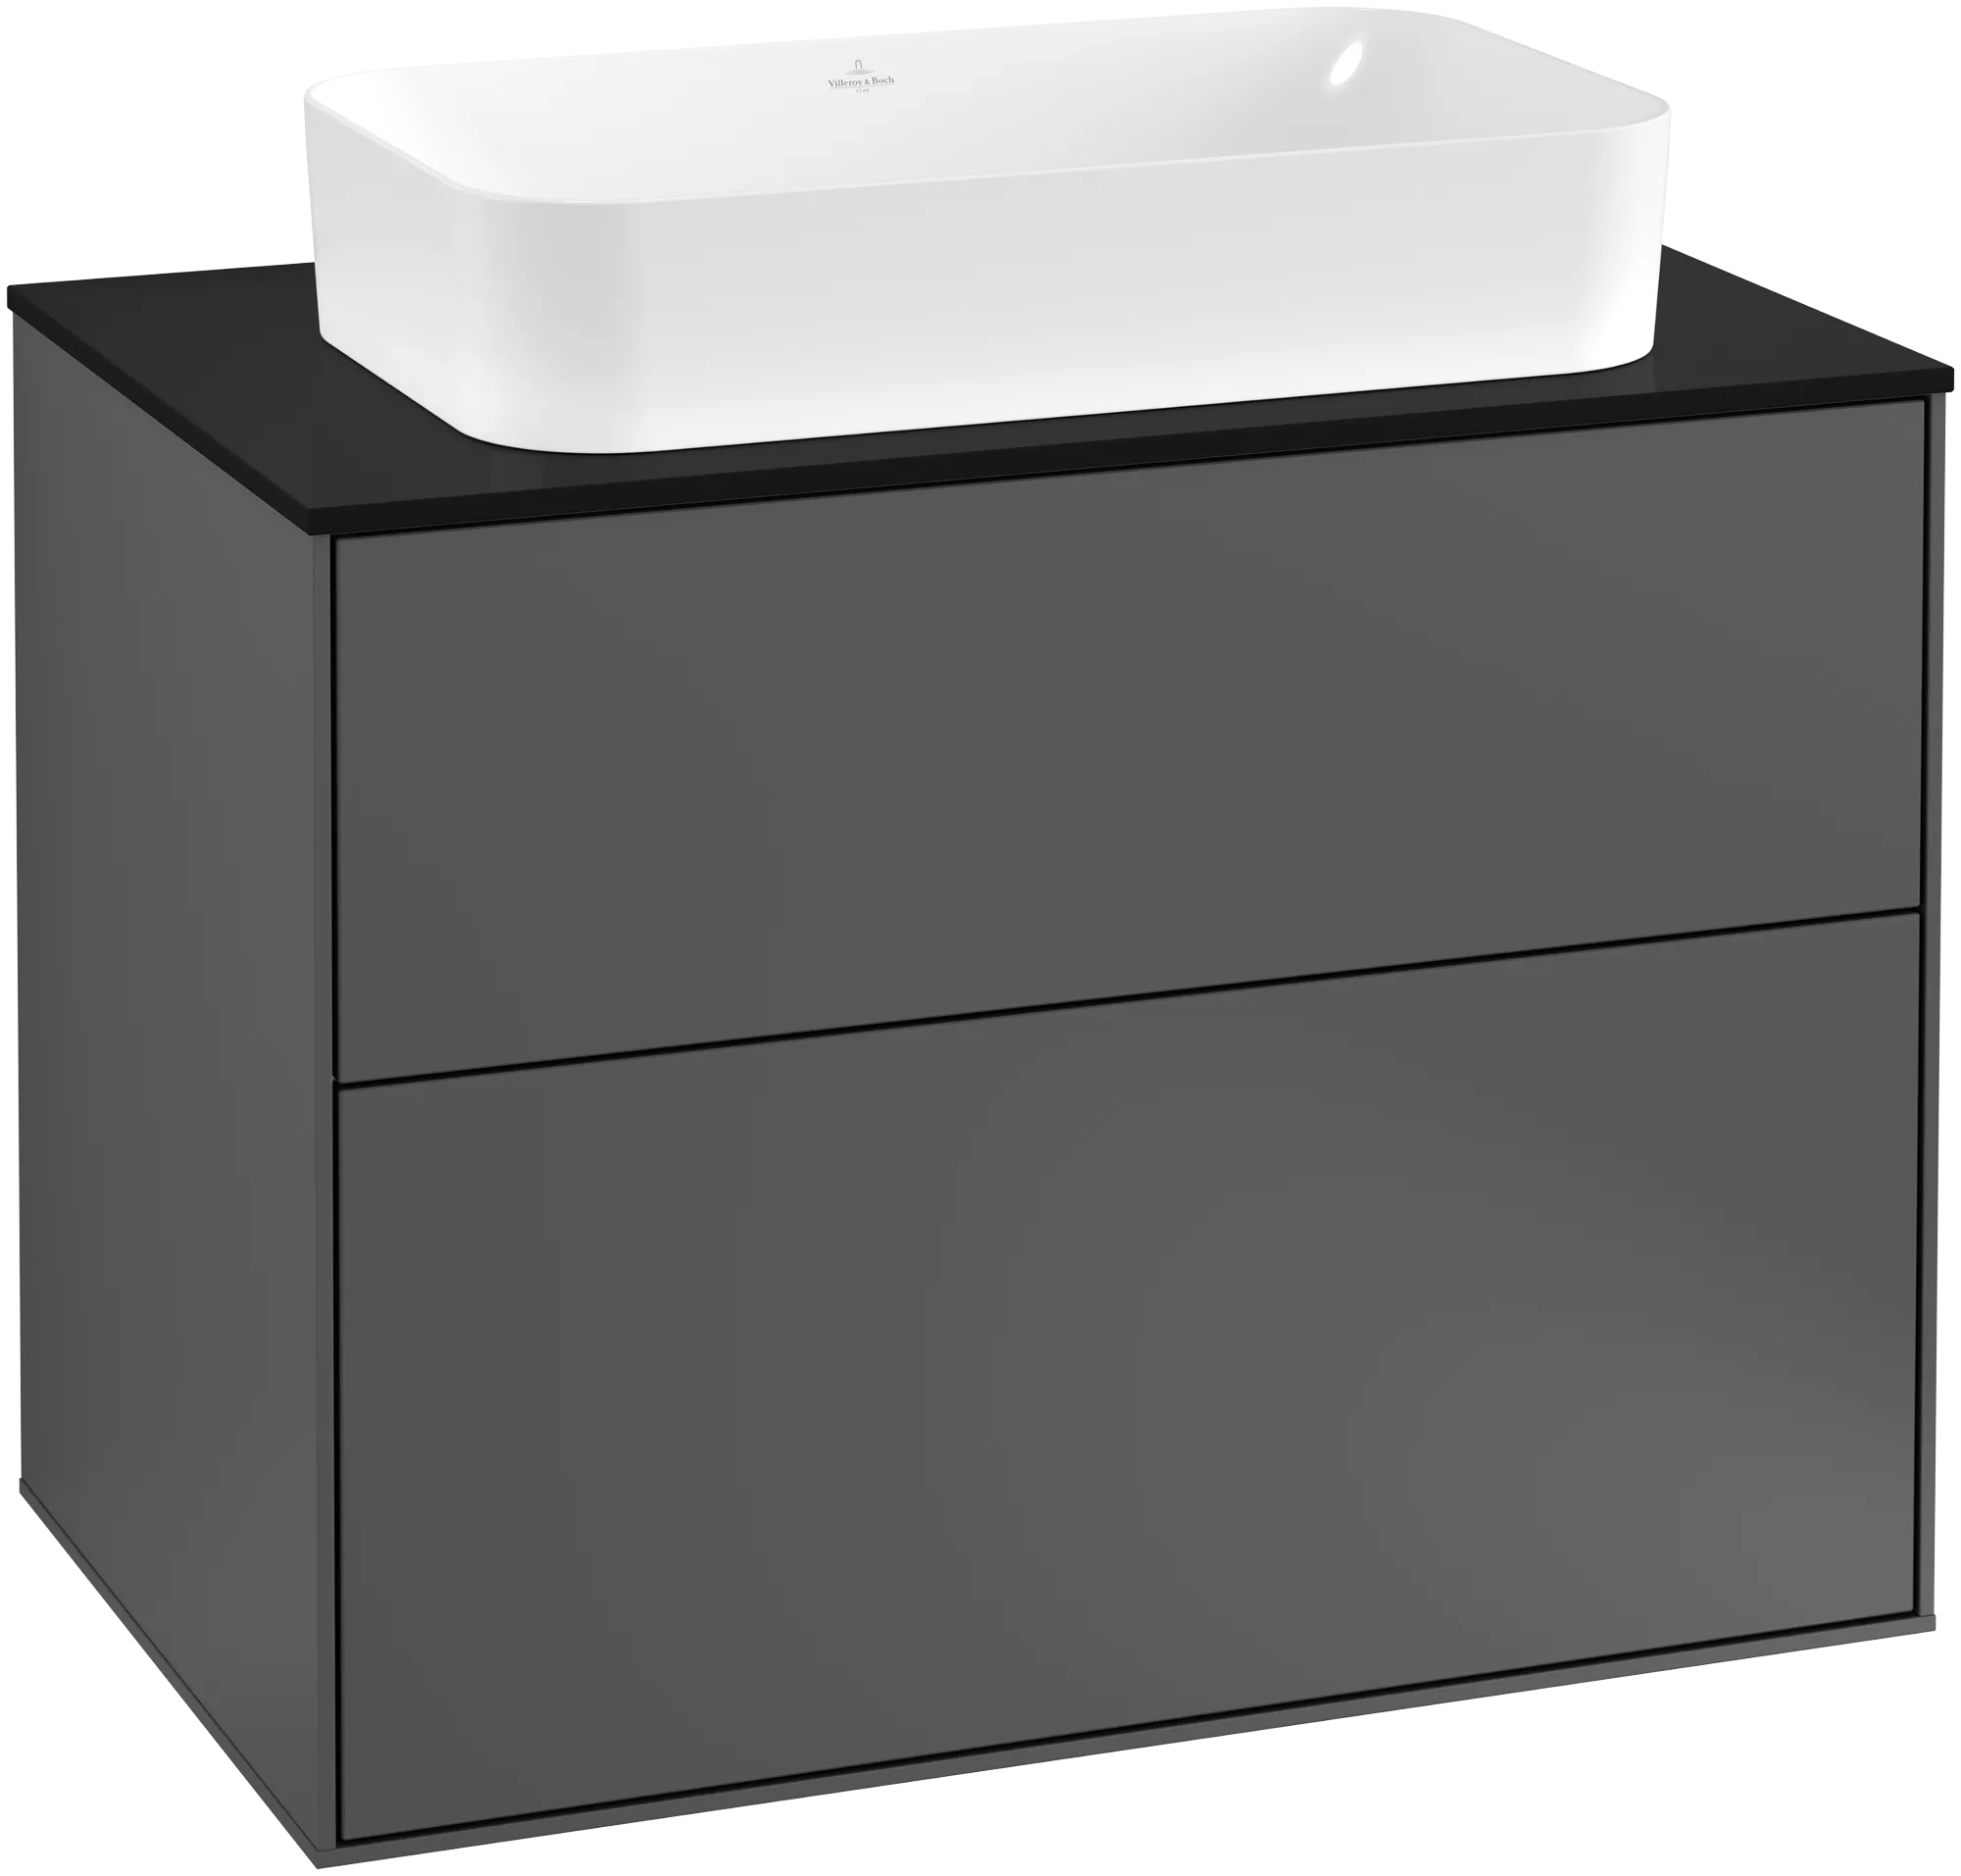 Picture of VILLEROY BOCH Finion Vanity unit, with lighting, 2 pull-out compartments, 800 x 603 x 501 mm, Anthracite Matt Lacquer / Glass Black Matt #G22200GK